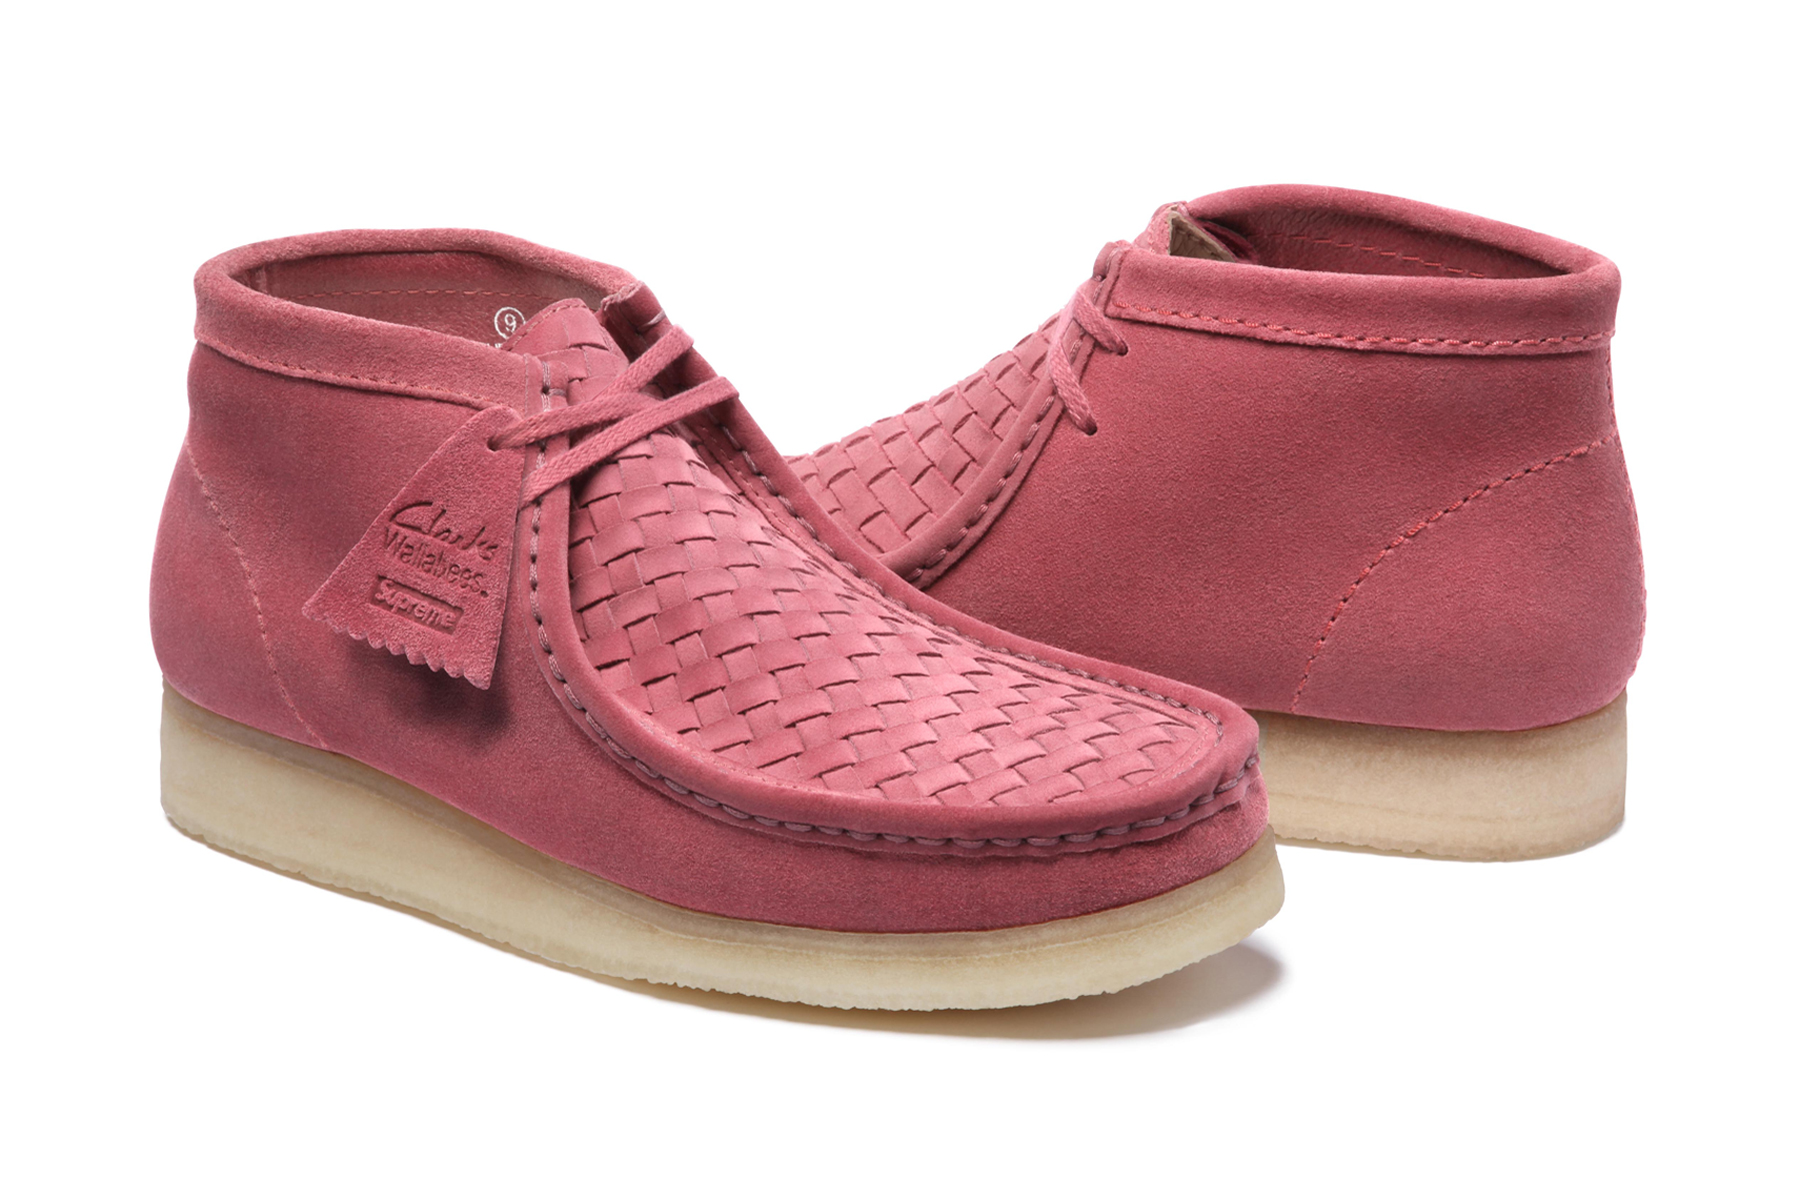 supreme-x-clarks-2016-spring-summer-collection-3